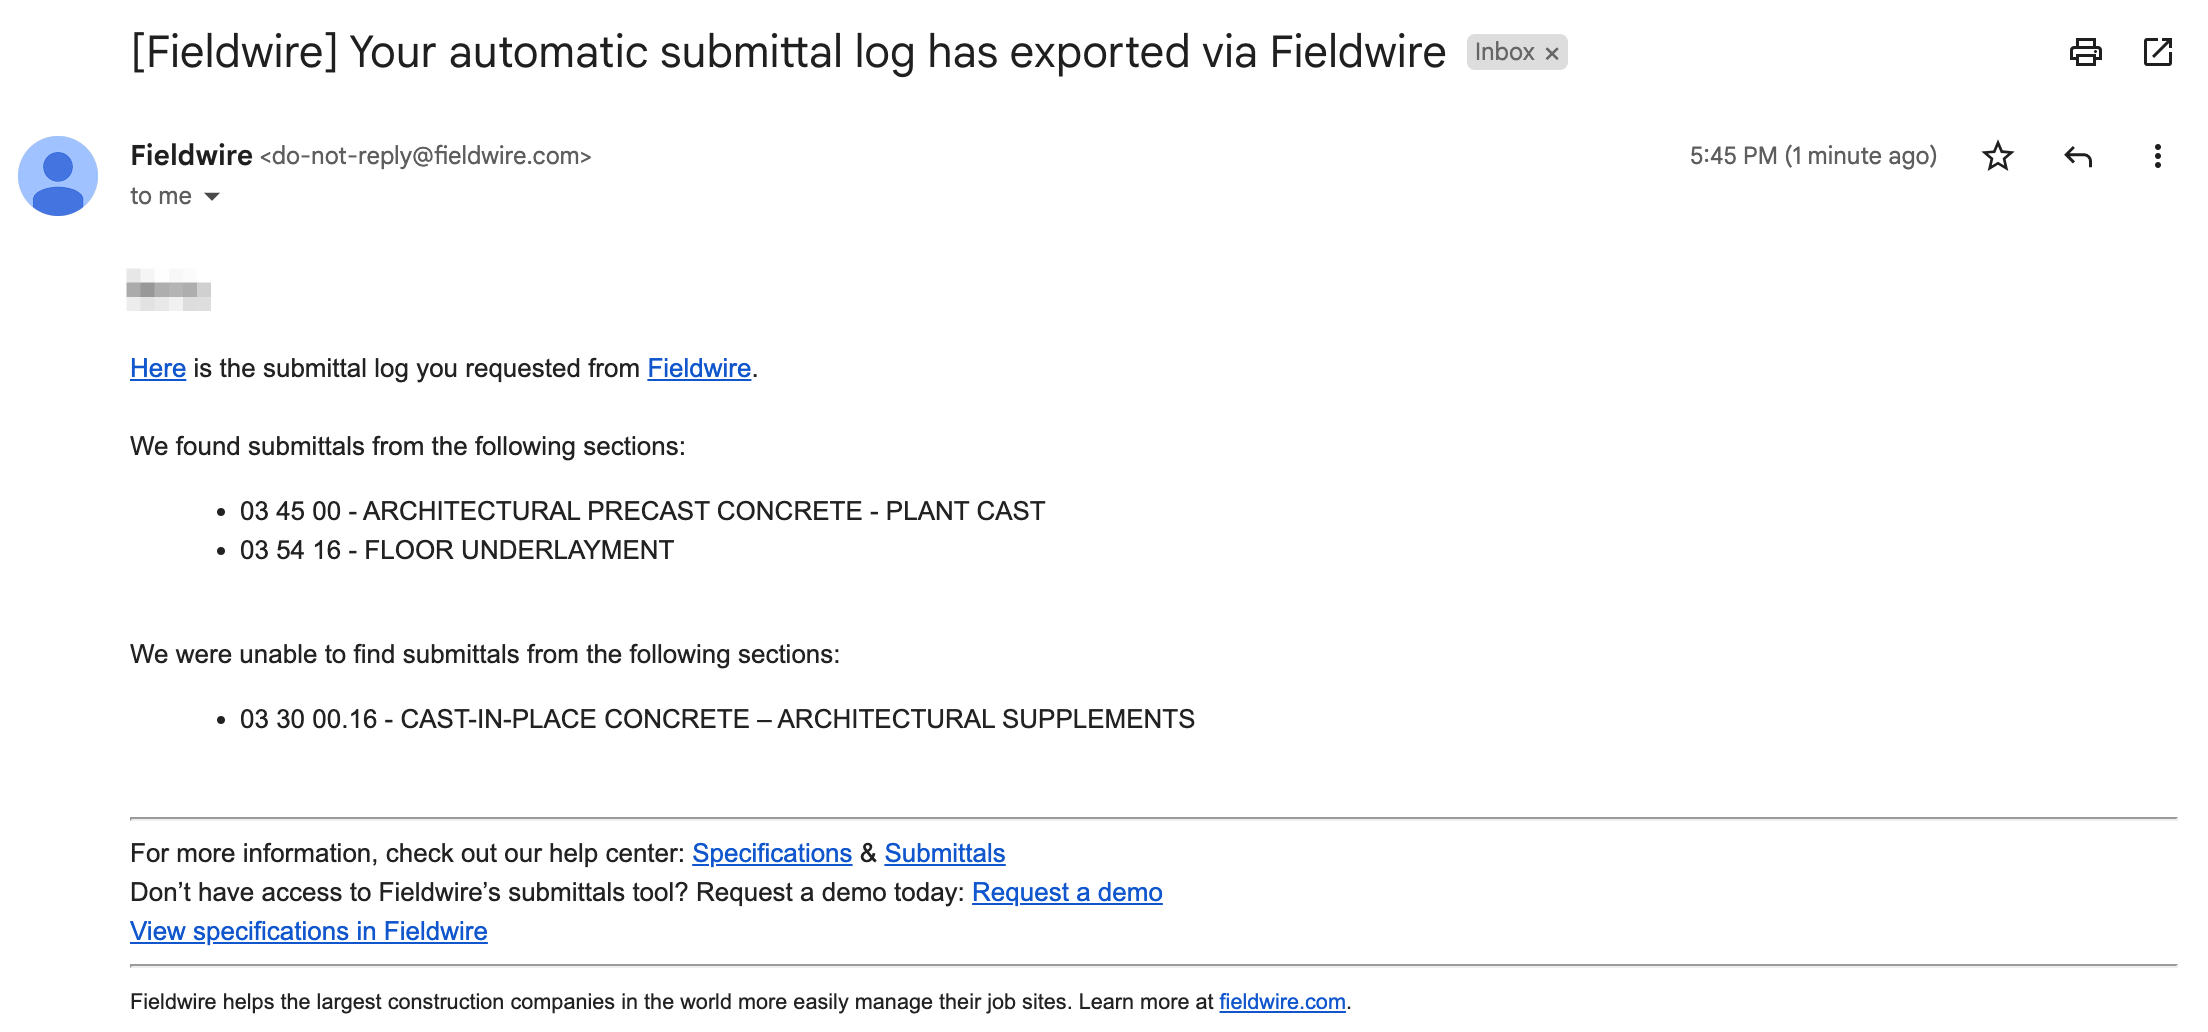 _Fieldwire__Your_automatic_submittal_log_has_exported_via_Fieldwire_-_benfieldwire2_gmail_com_-_Gmail.png